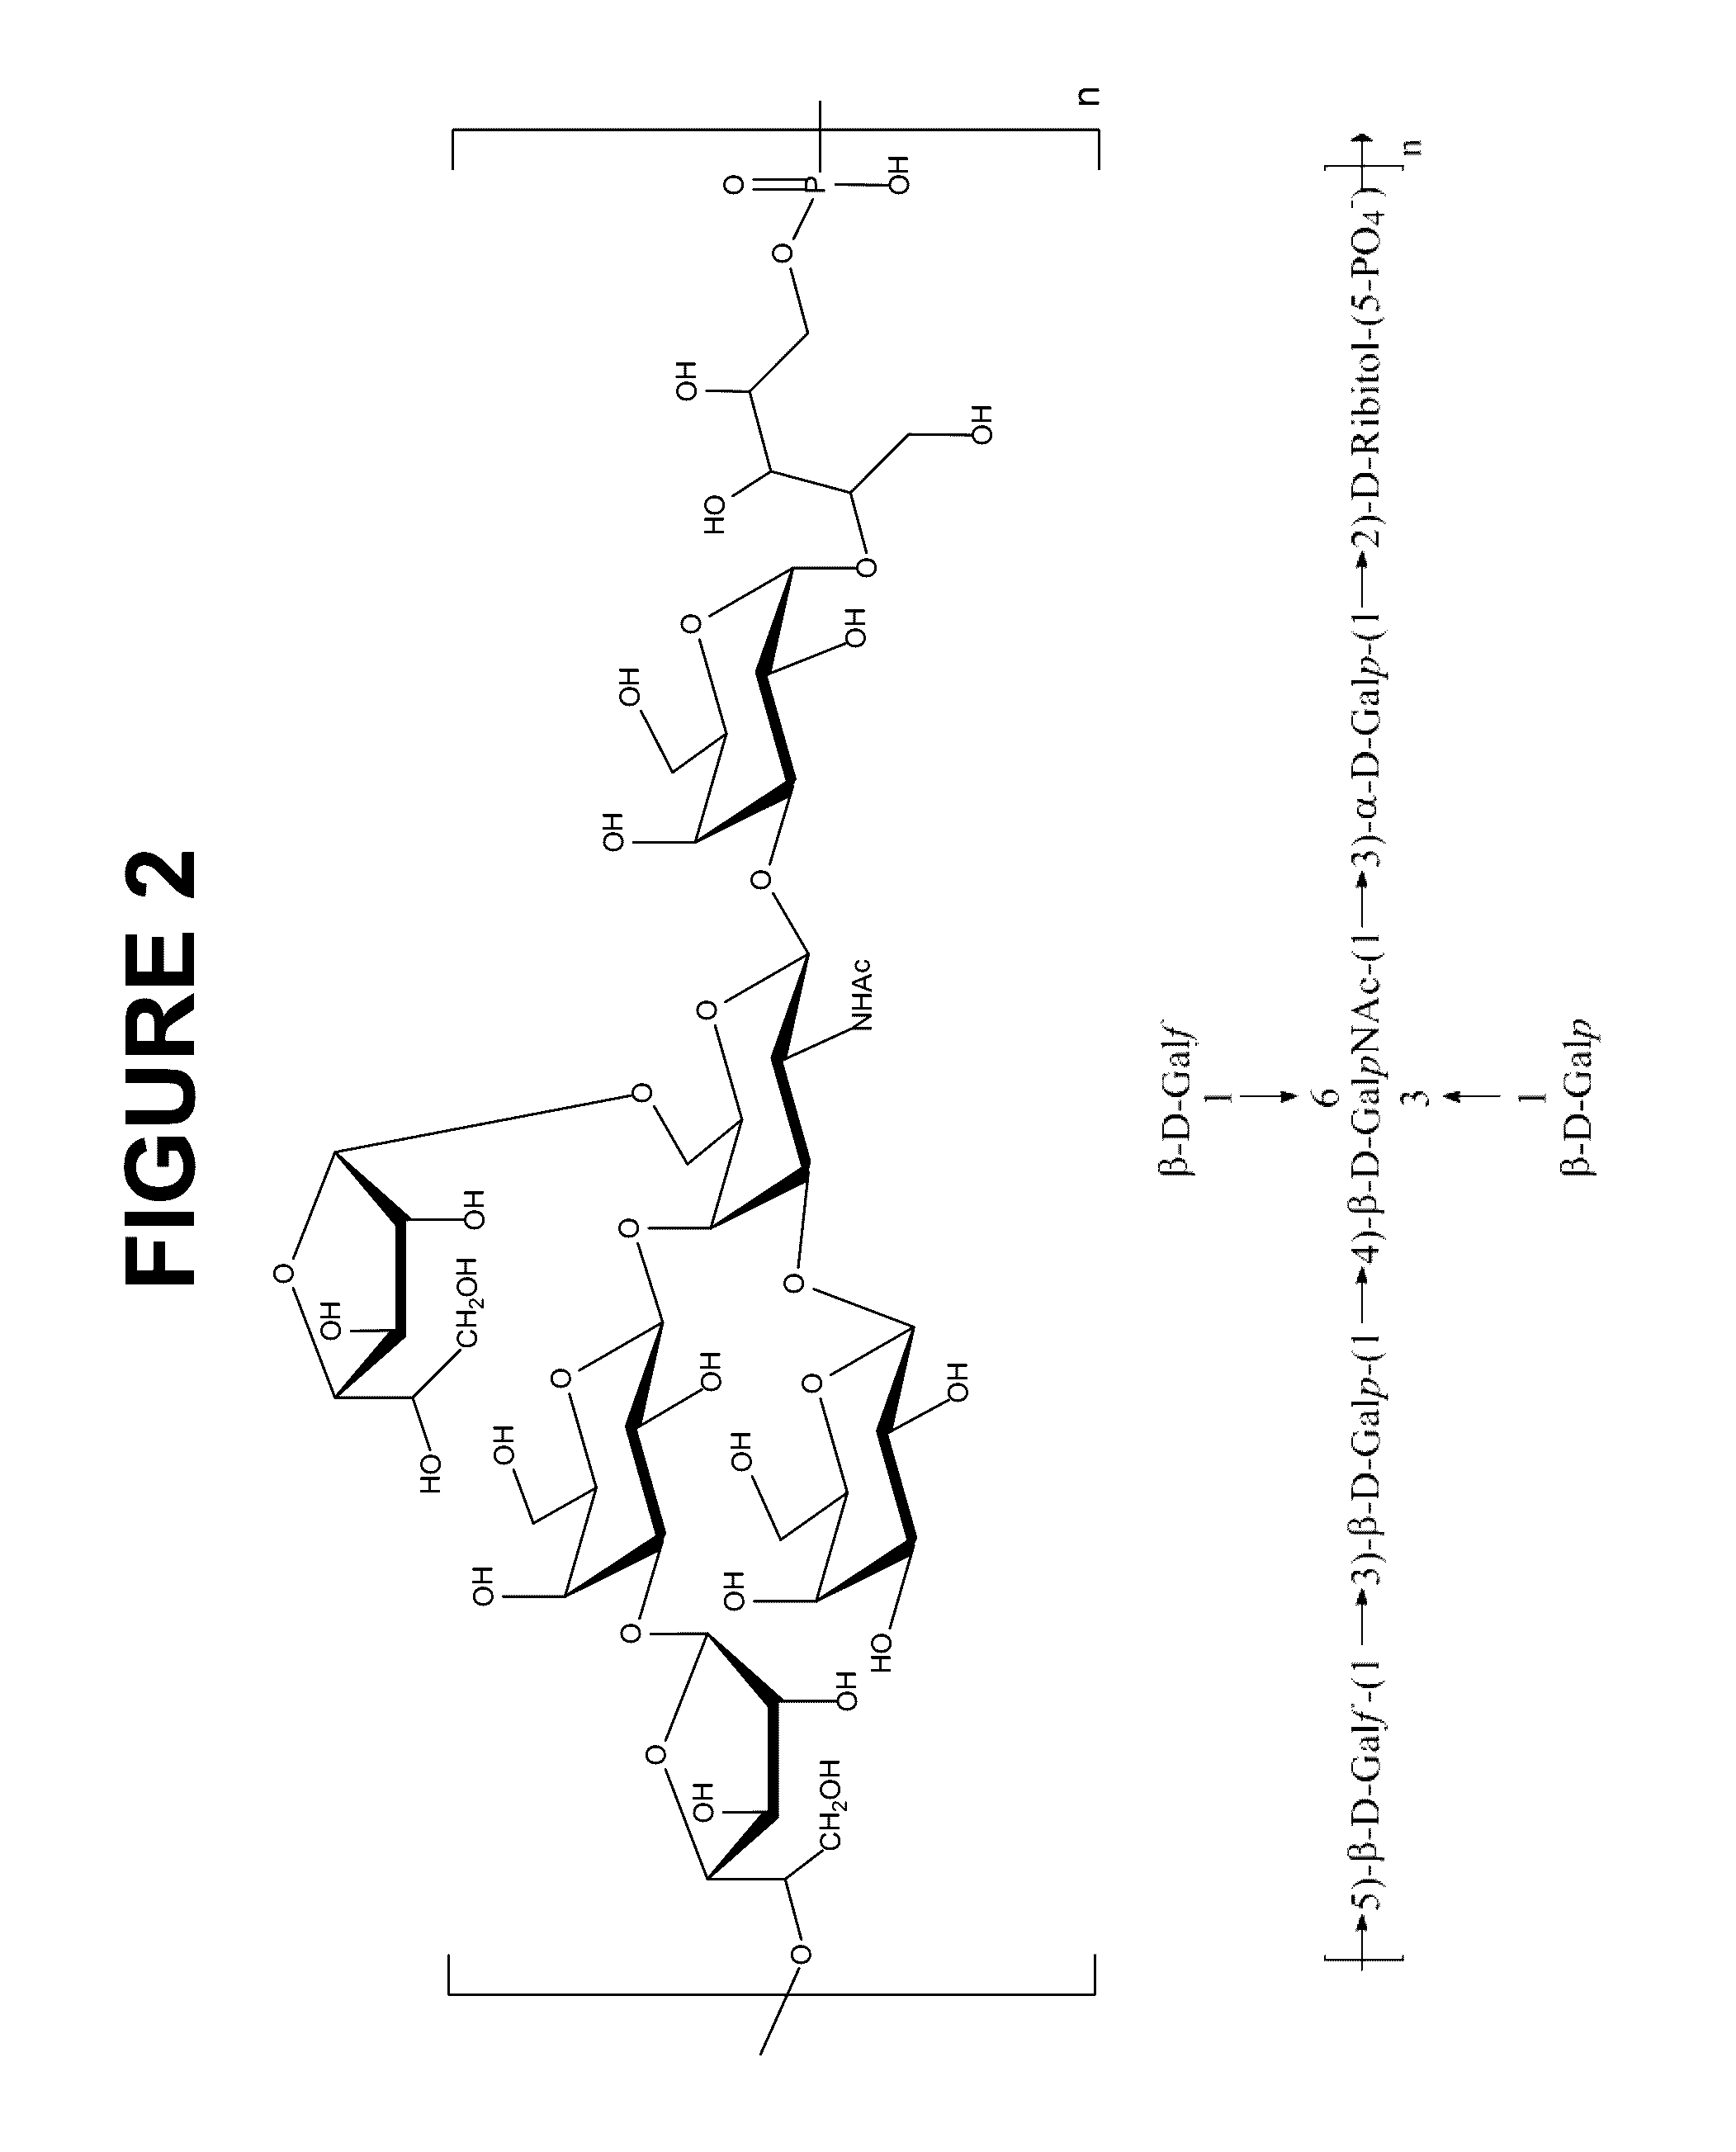 Immunogenic compositions comprising conjugated capsular saccharide antigens and uses thereof